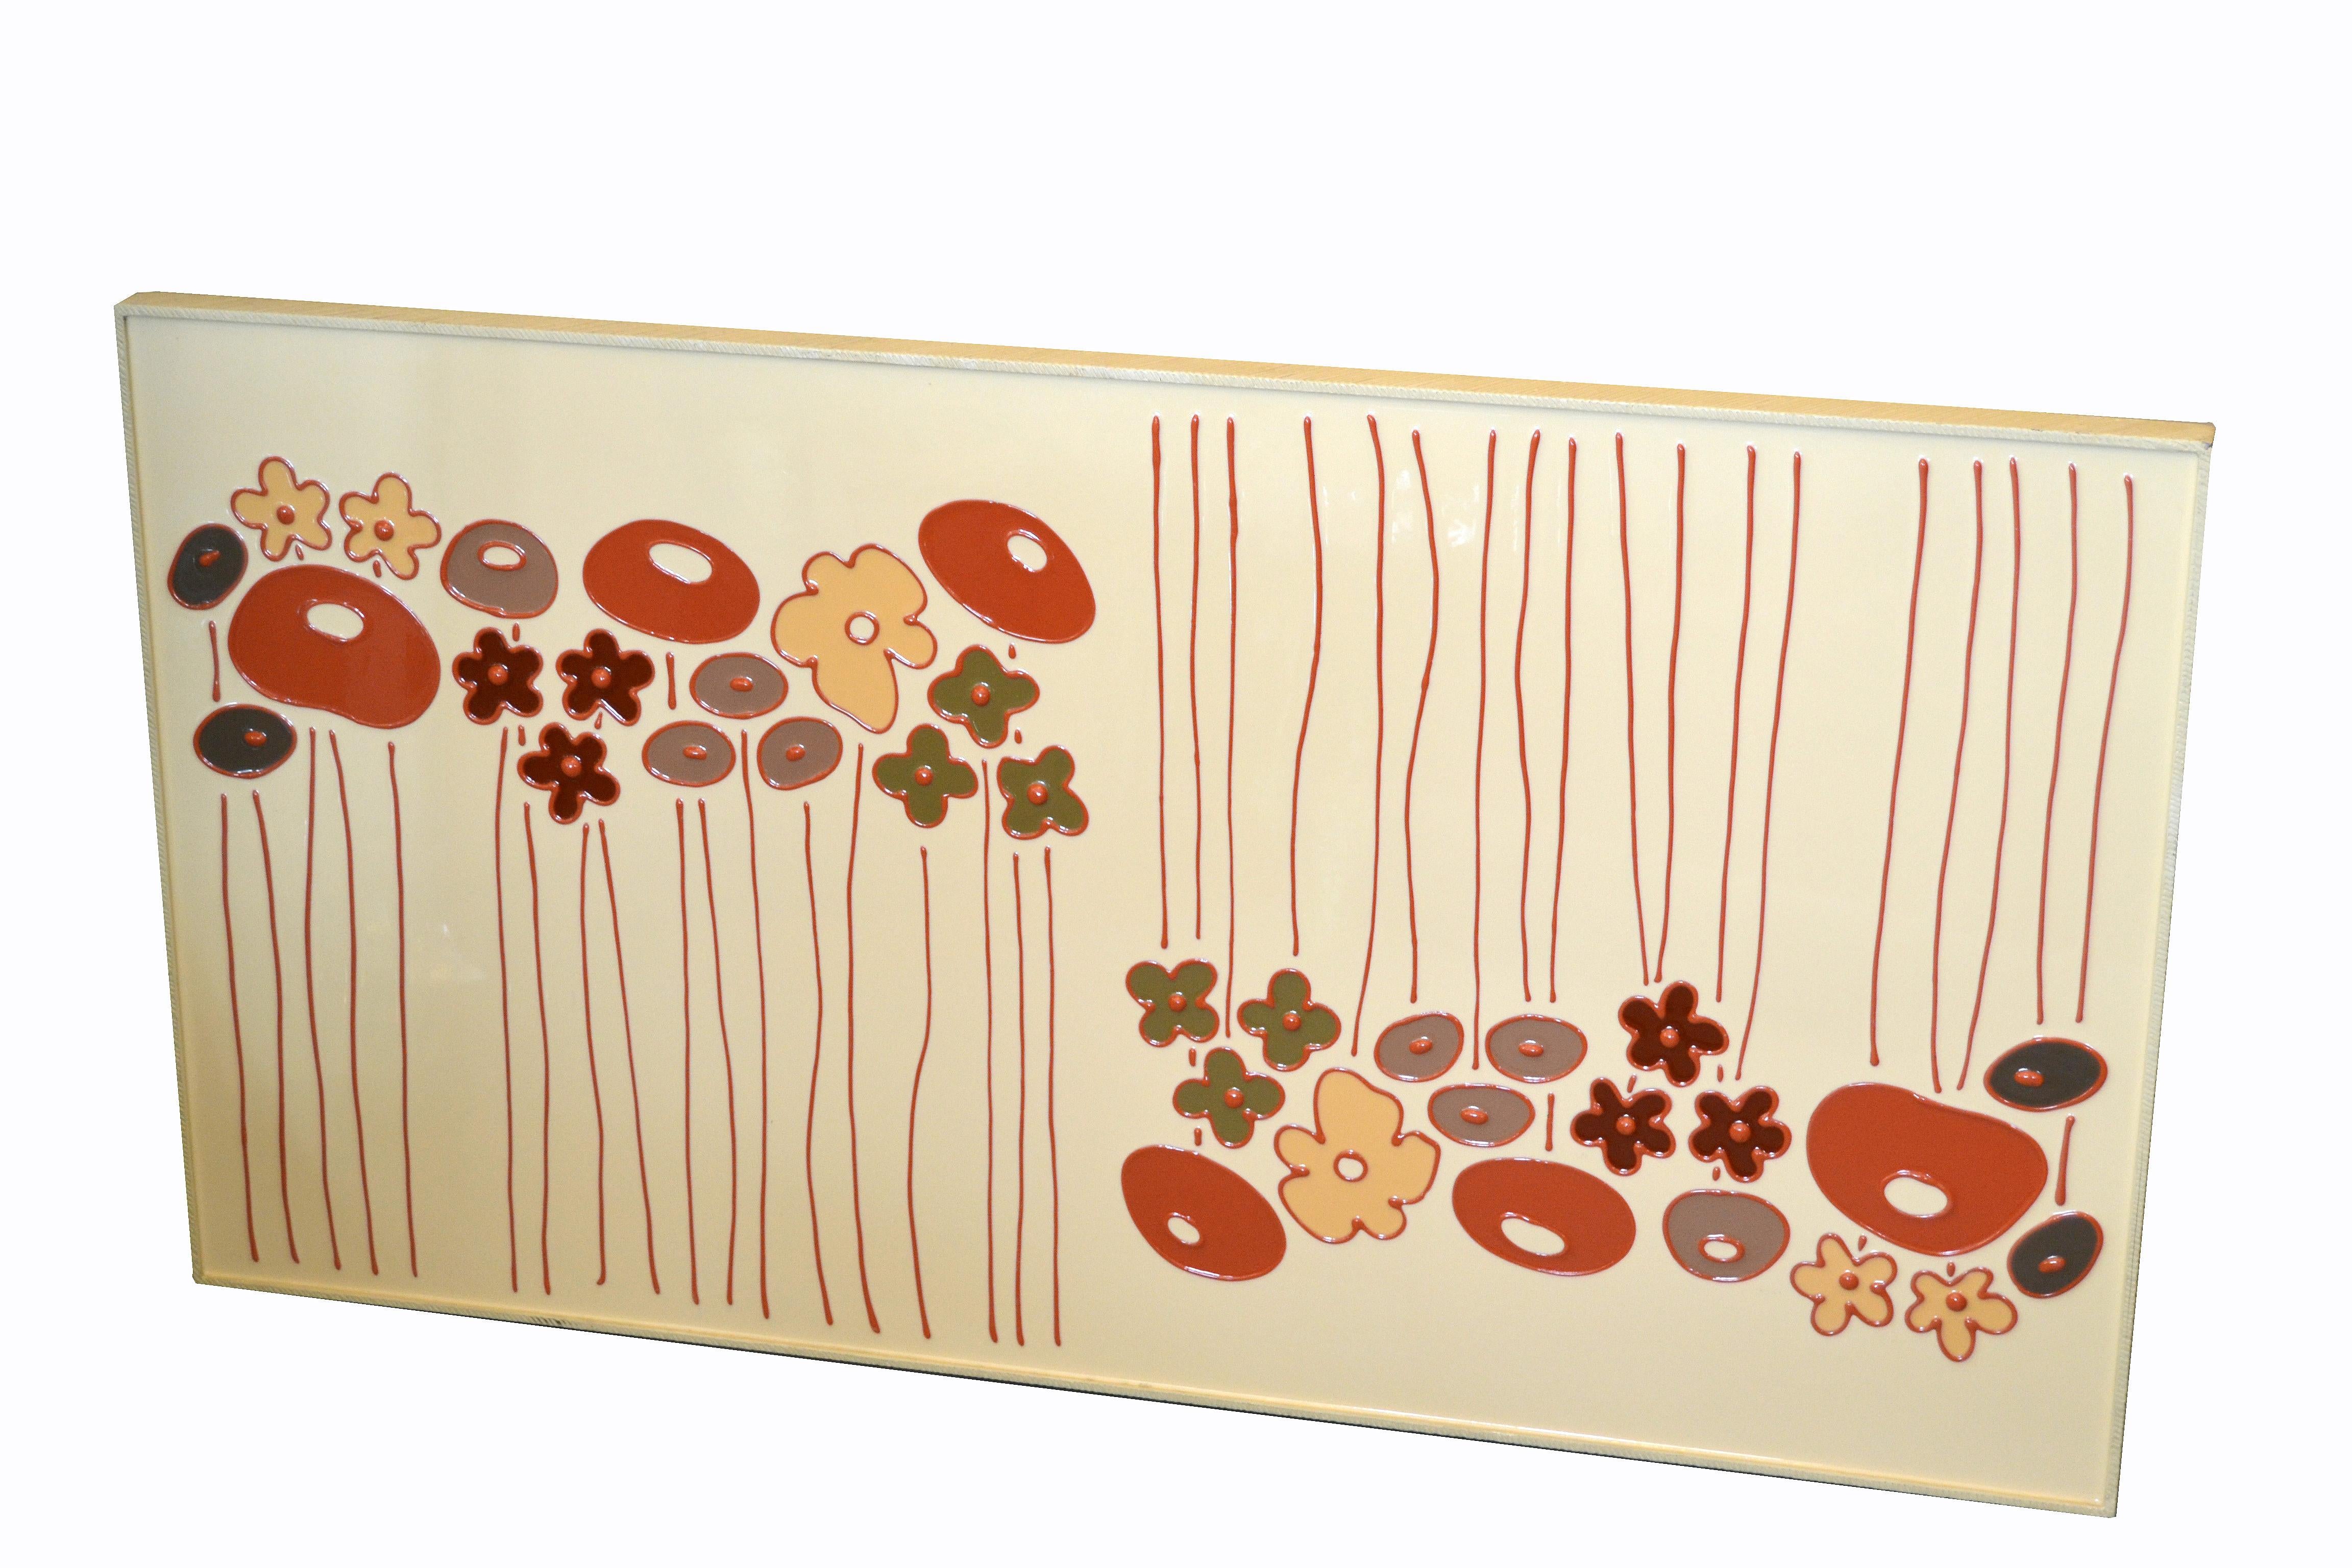 Incredible artistic beige enamel sculpted flowers that can be wall mounted.
It is framed and can be hung in landscape format as well as horizontal format.
In good vintage condition.